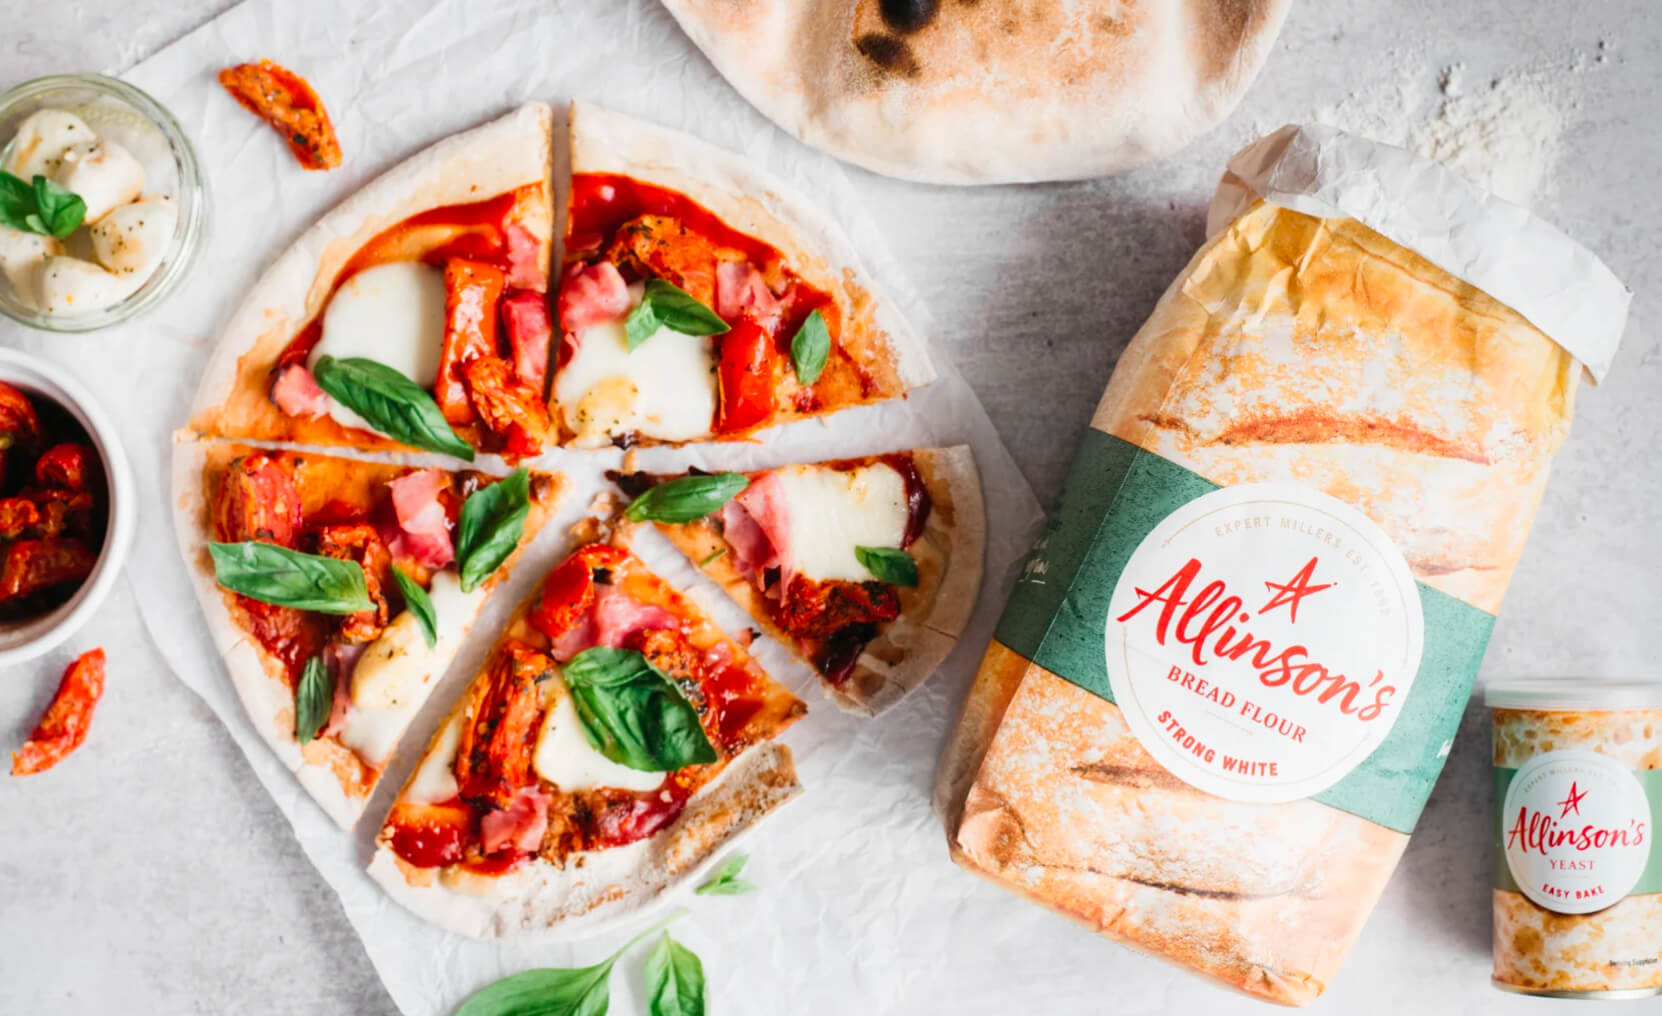 A home made pizza sits on a table, alongside a pack of Allinson's Strong White Bread Flour and Allinson's Yeast.